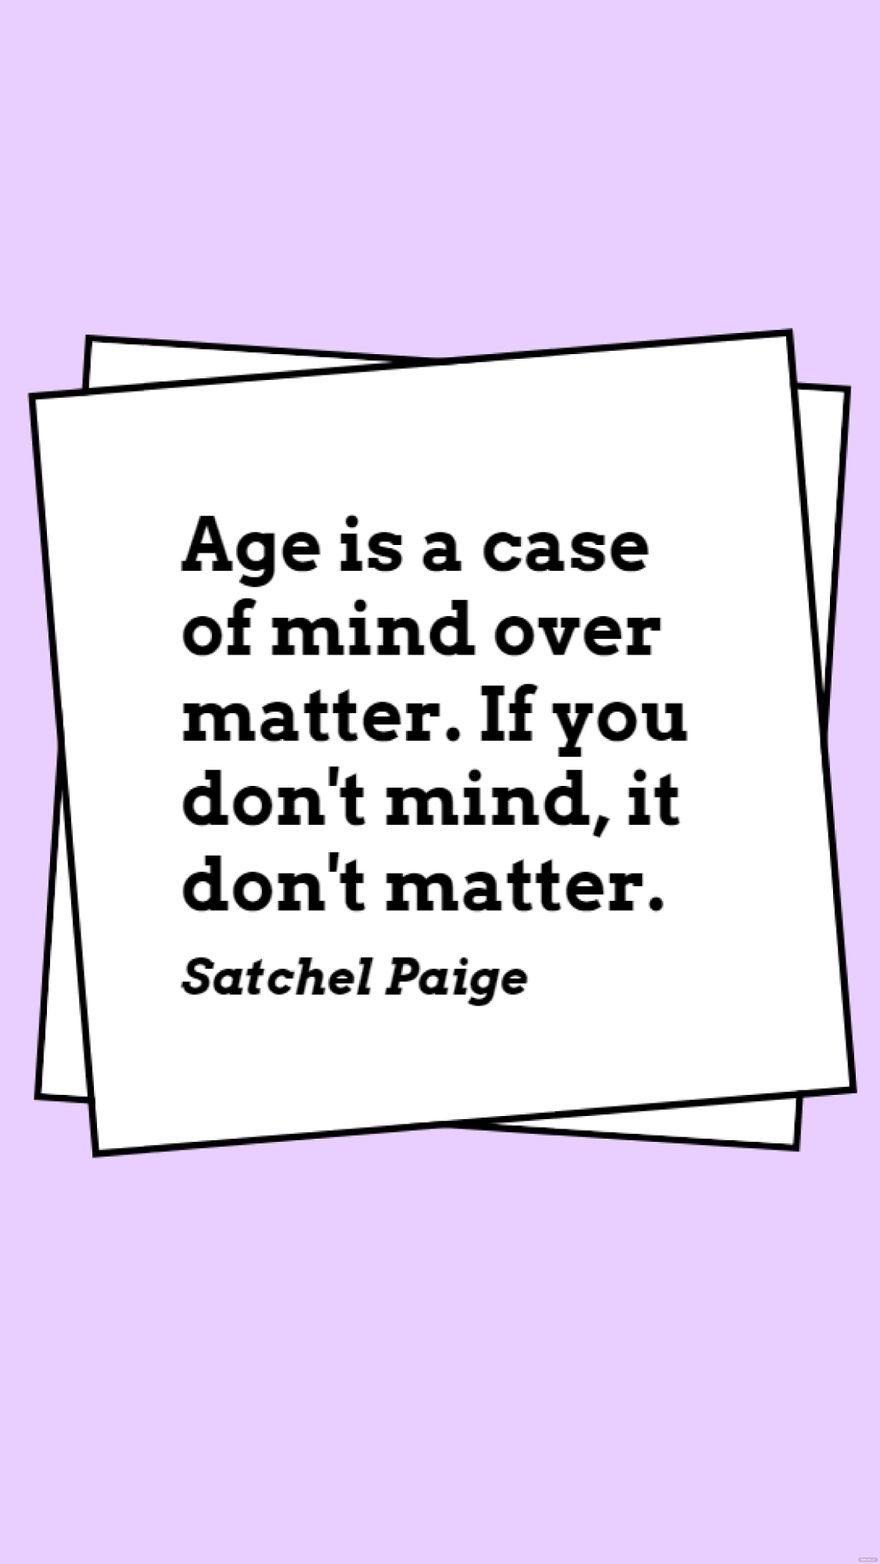 Satchel Paige - Age is a case of mind over matter. If you don't mind, it don't matter.